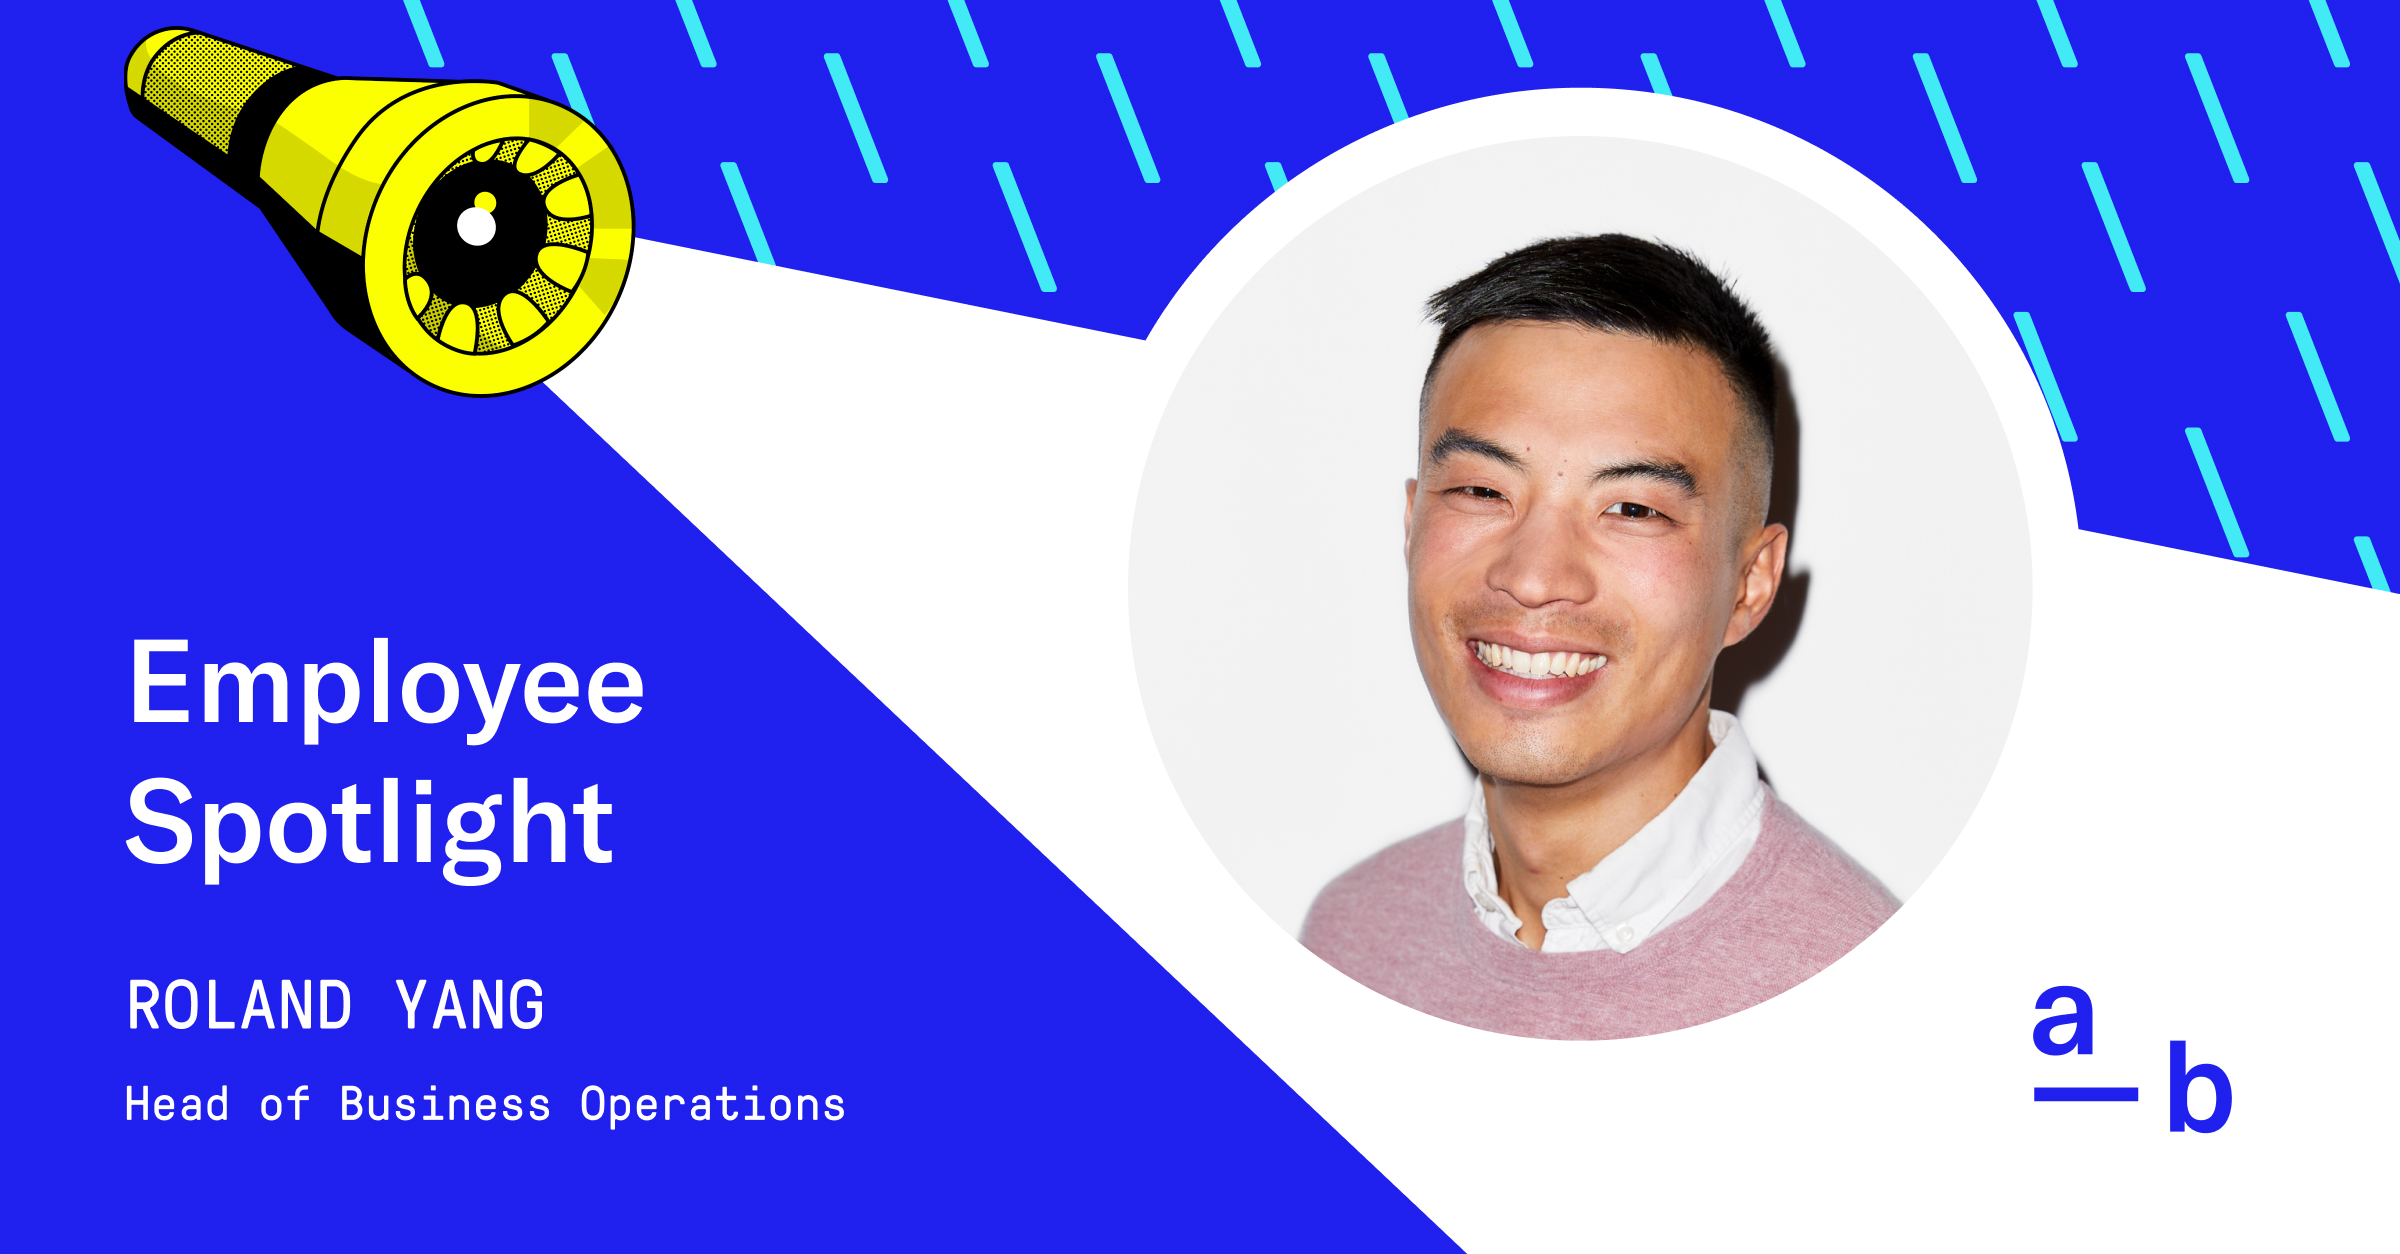 Meet Roland Yang, Head of Business Operations